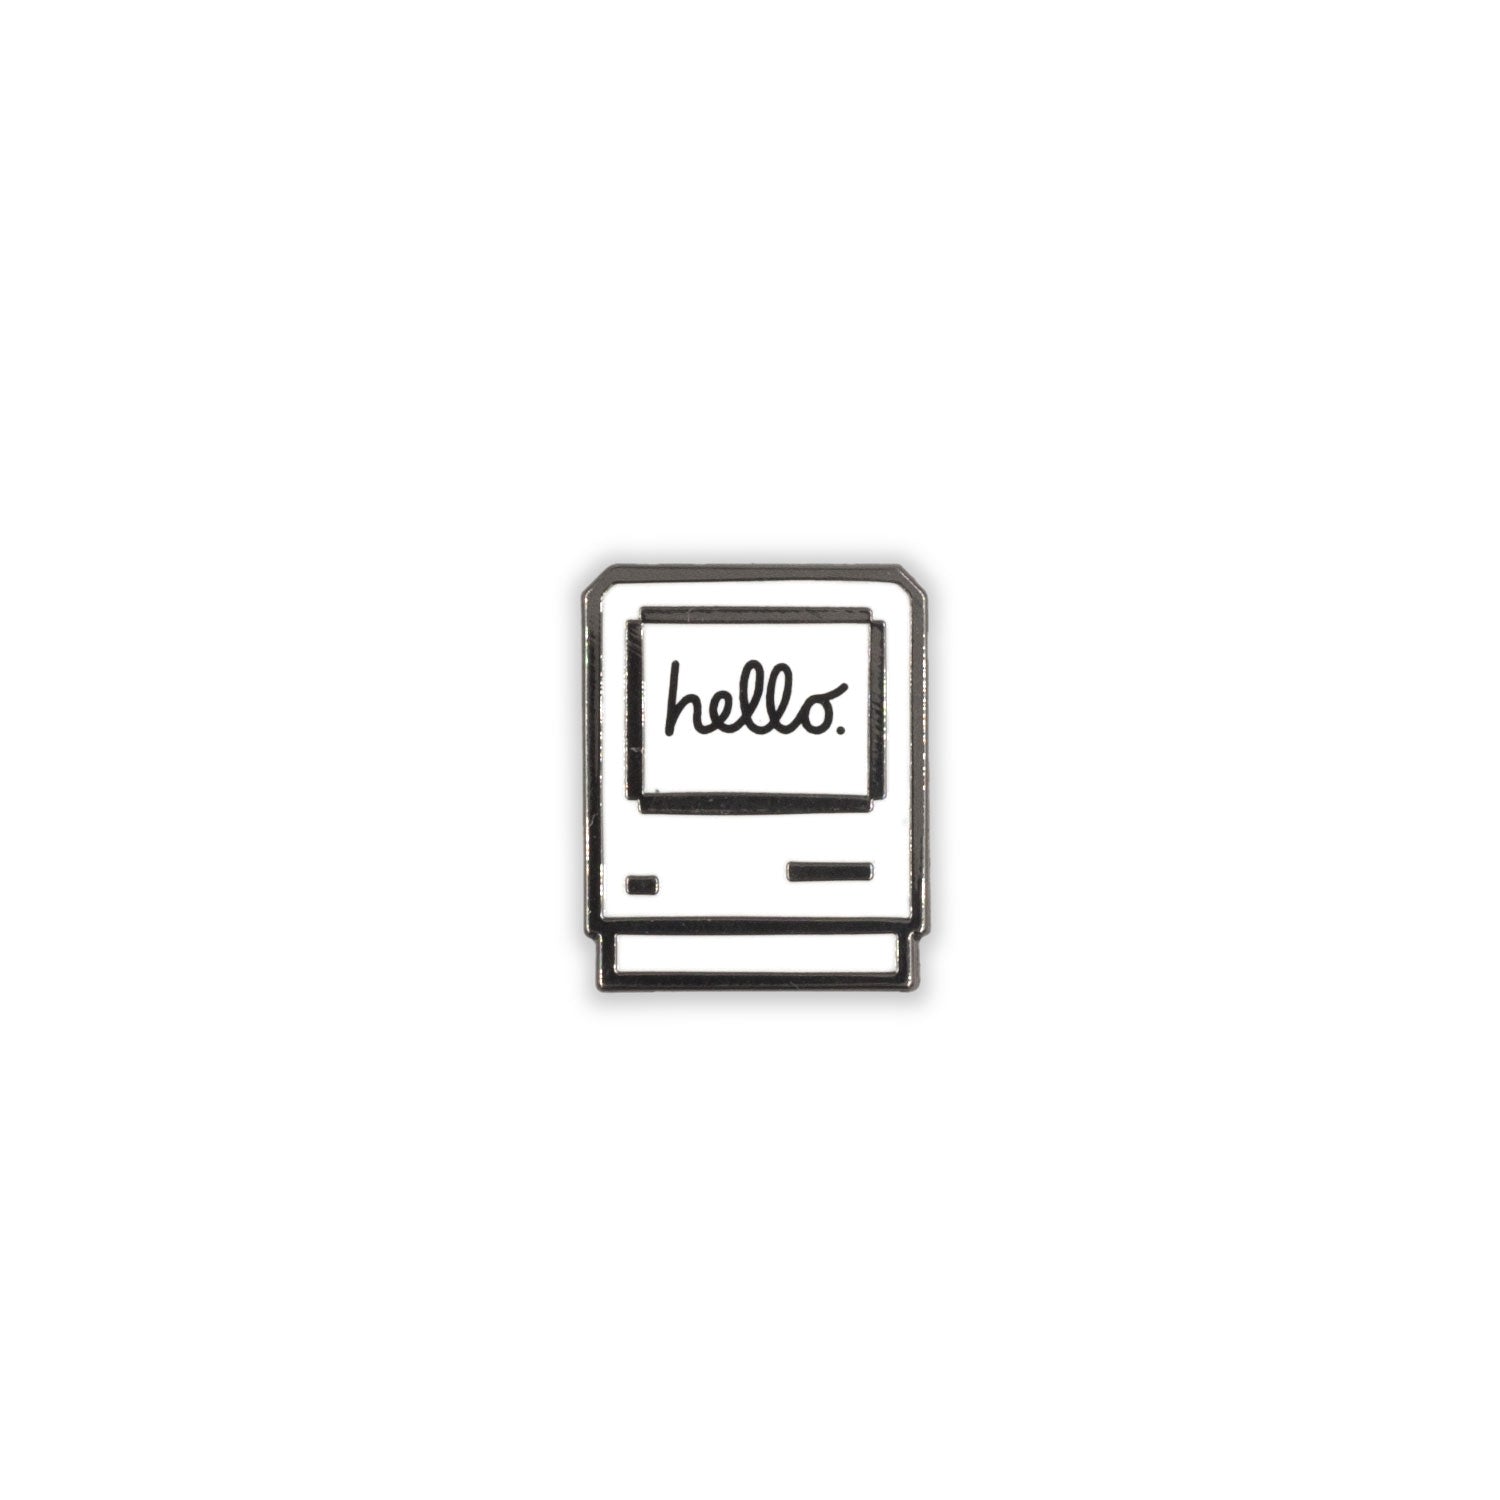 Personal computer icon with a "hello" script inside.